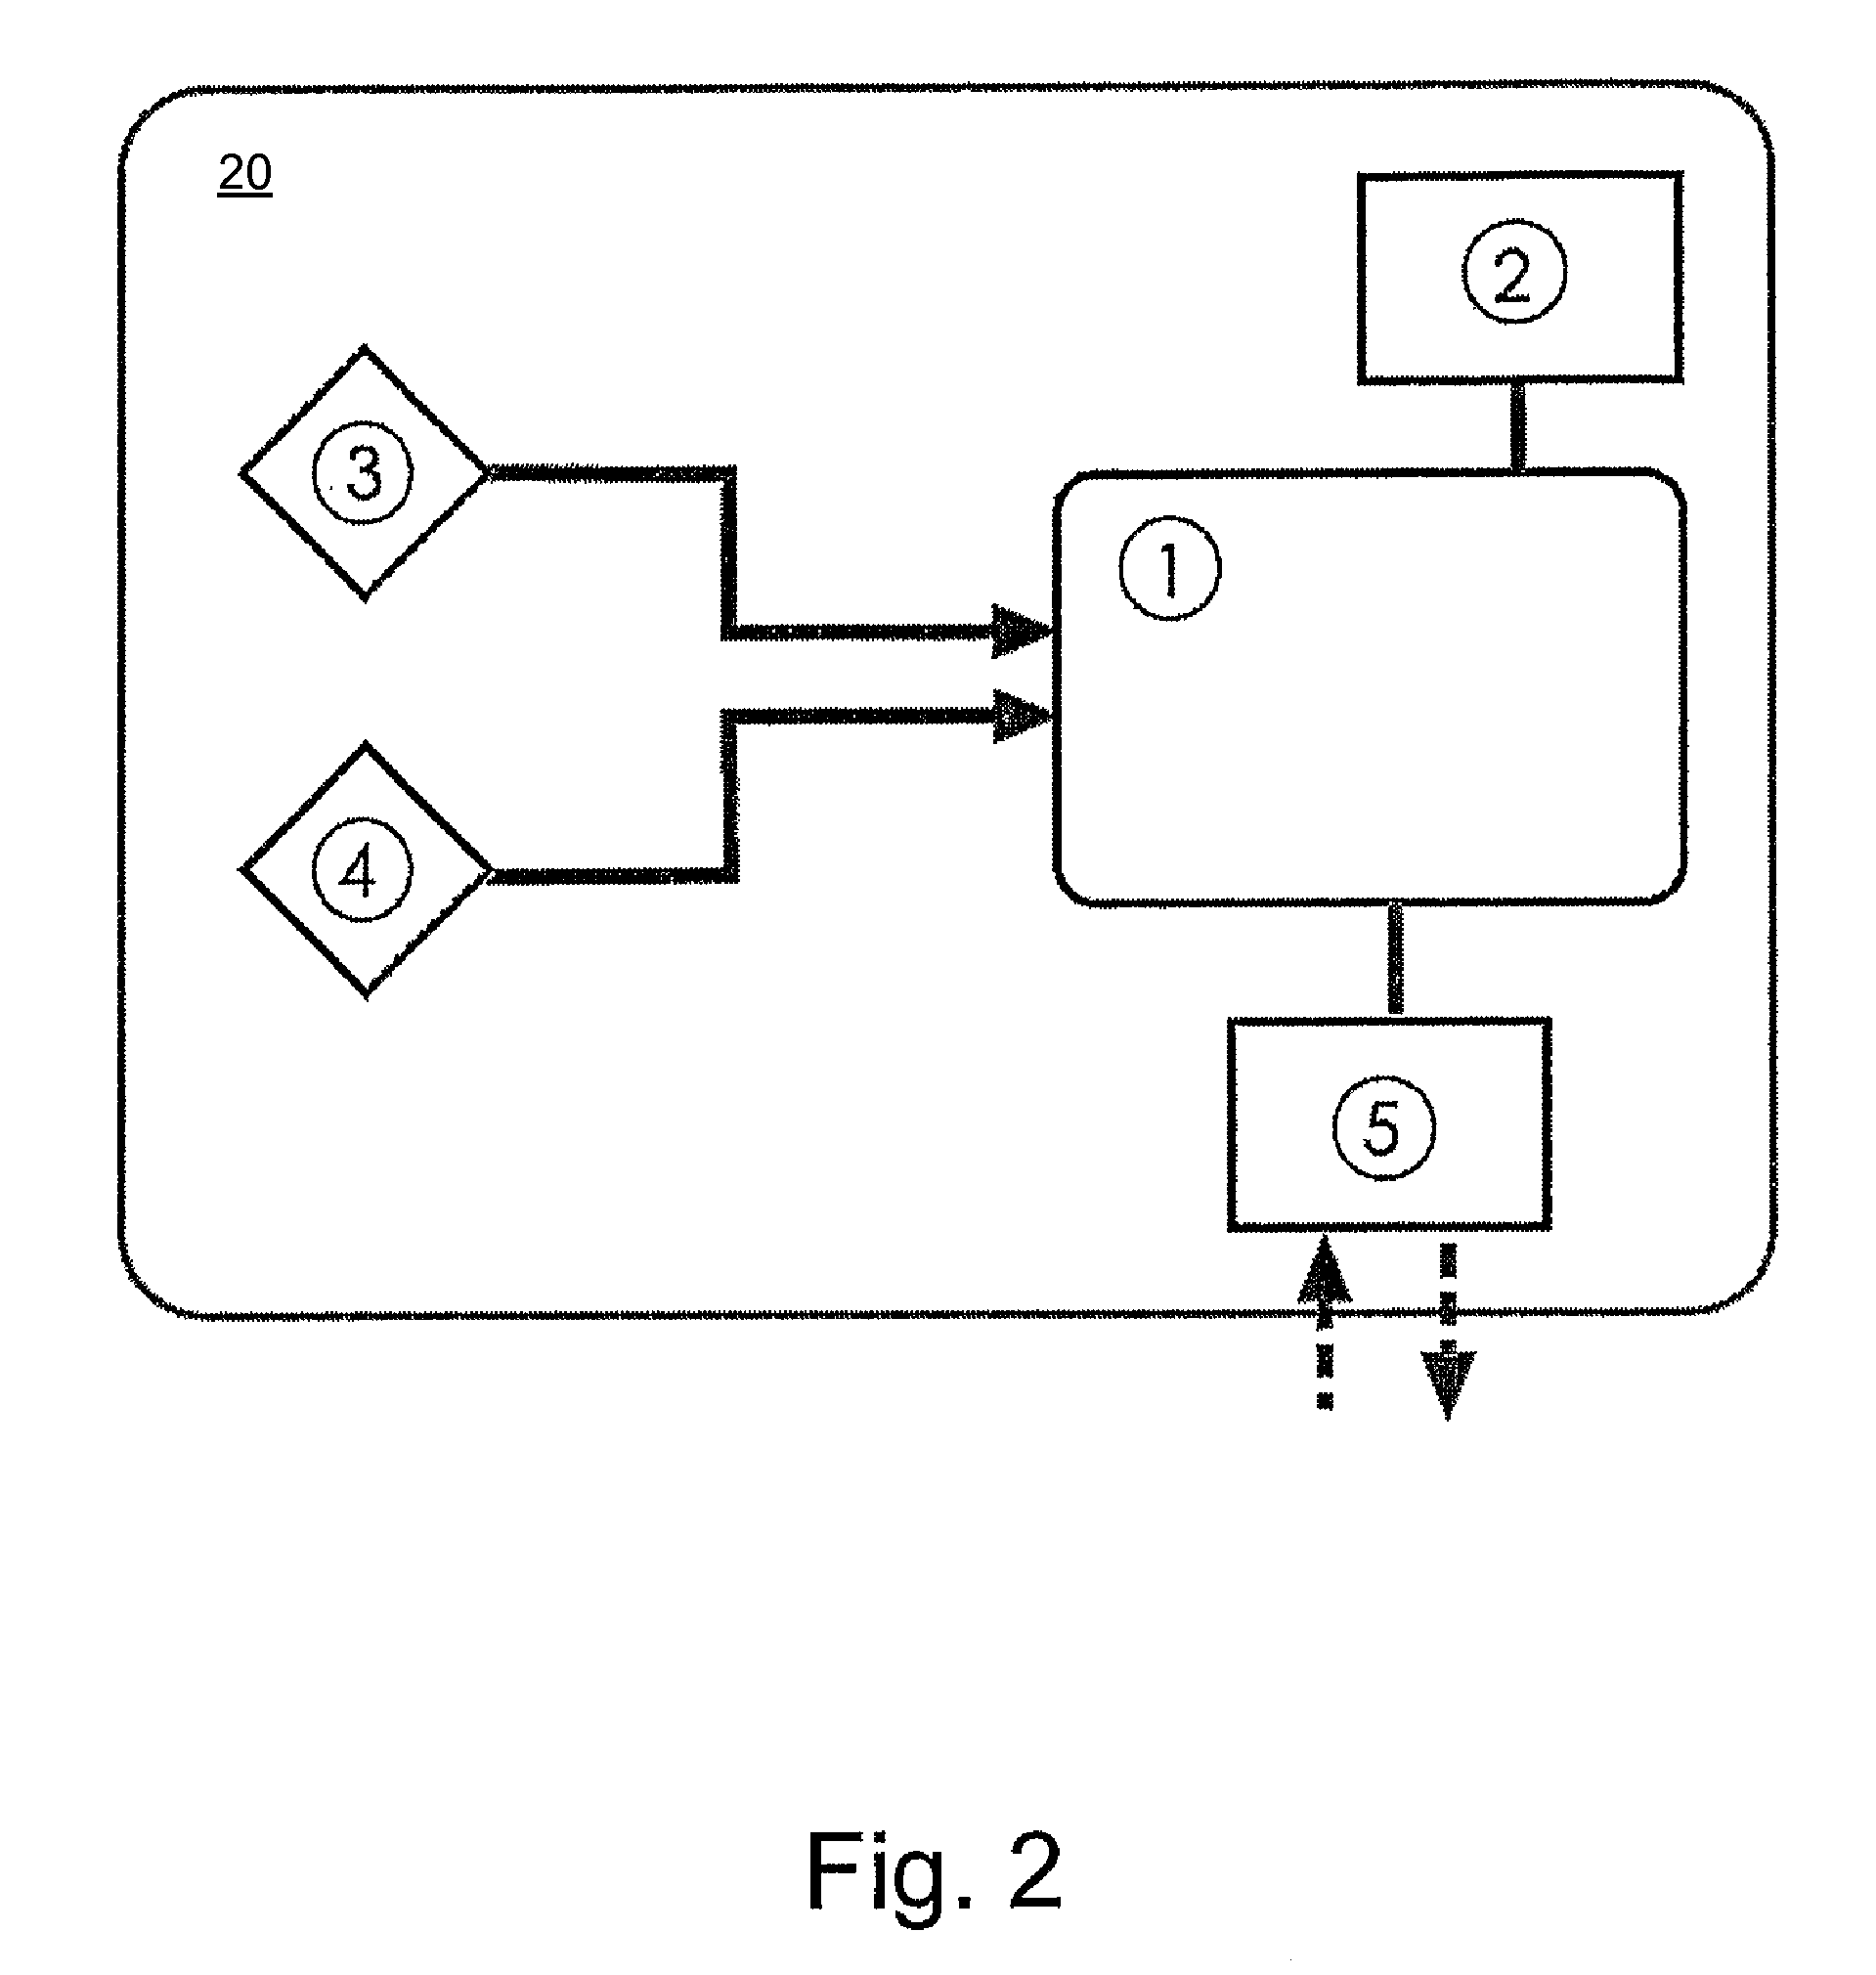 Method and device for detecting estrus